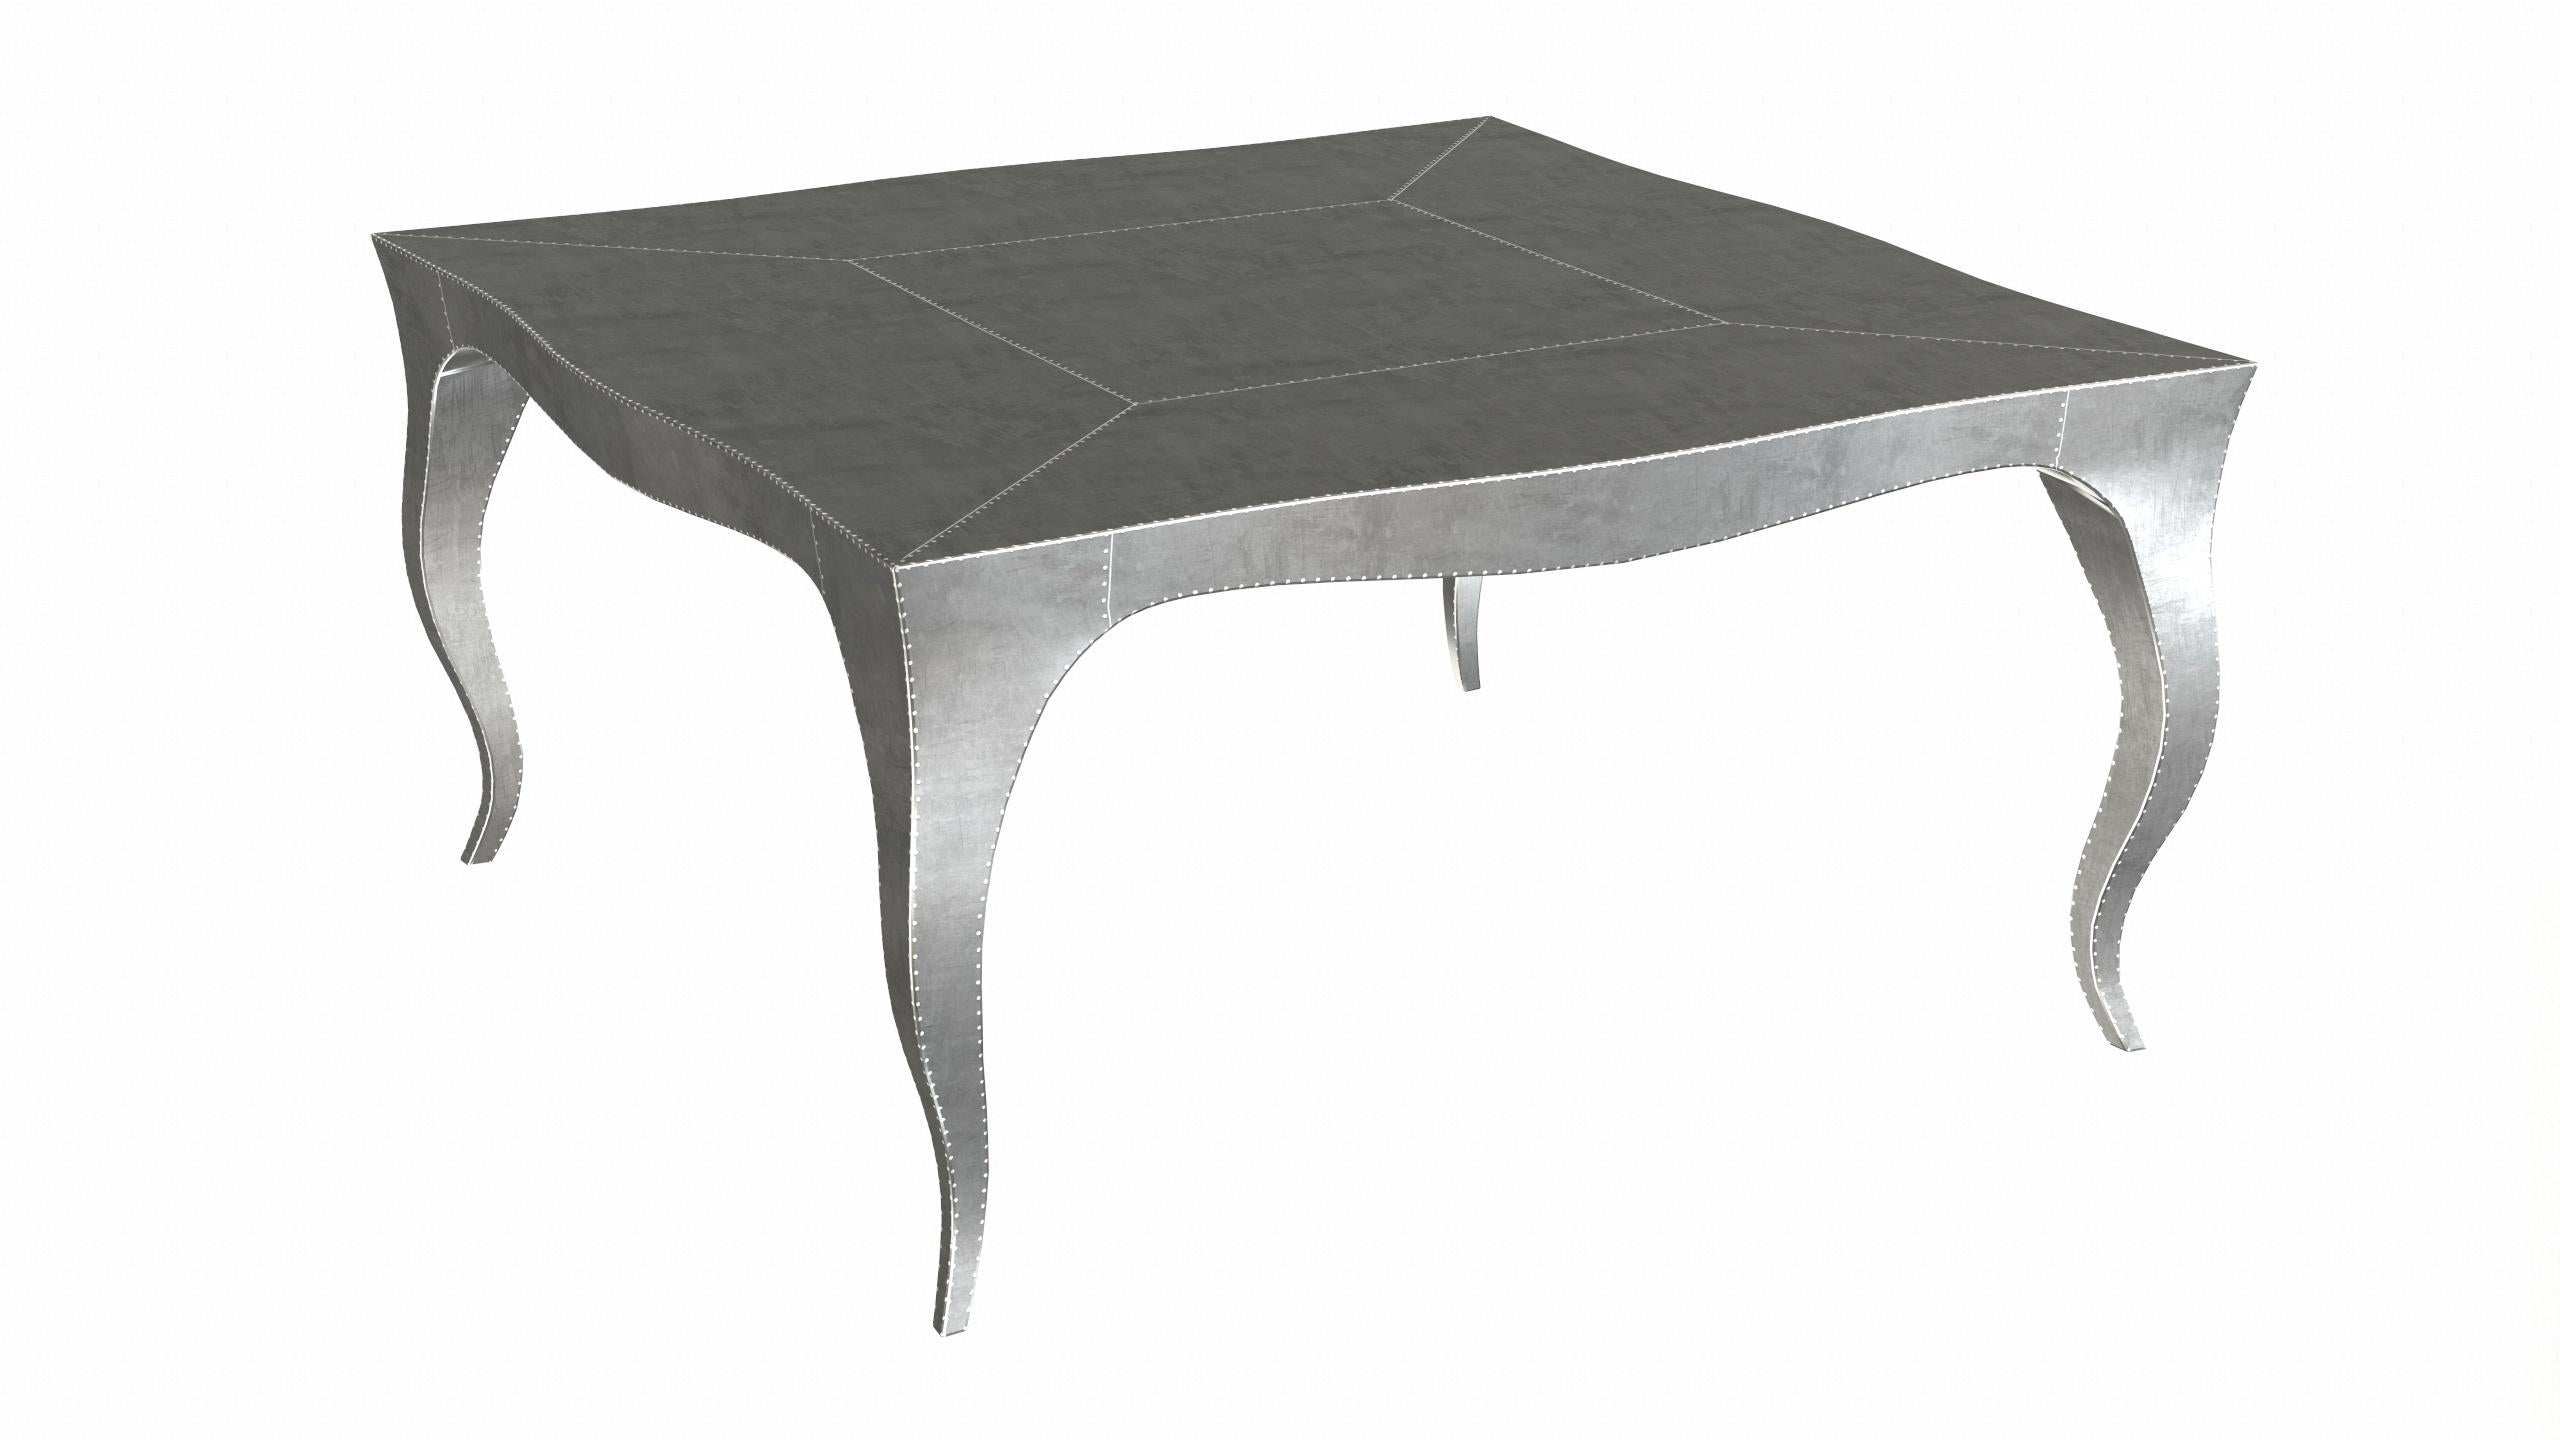 American Louise Art Deco Center Tables Smooth White Bronze by Paul Mathieu for S.Odegard For Sale